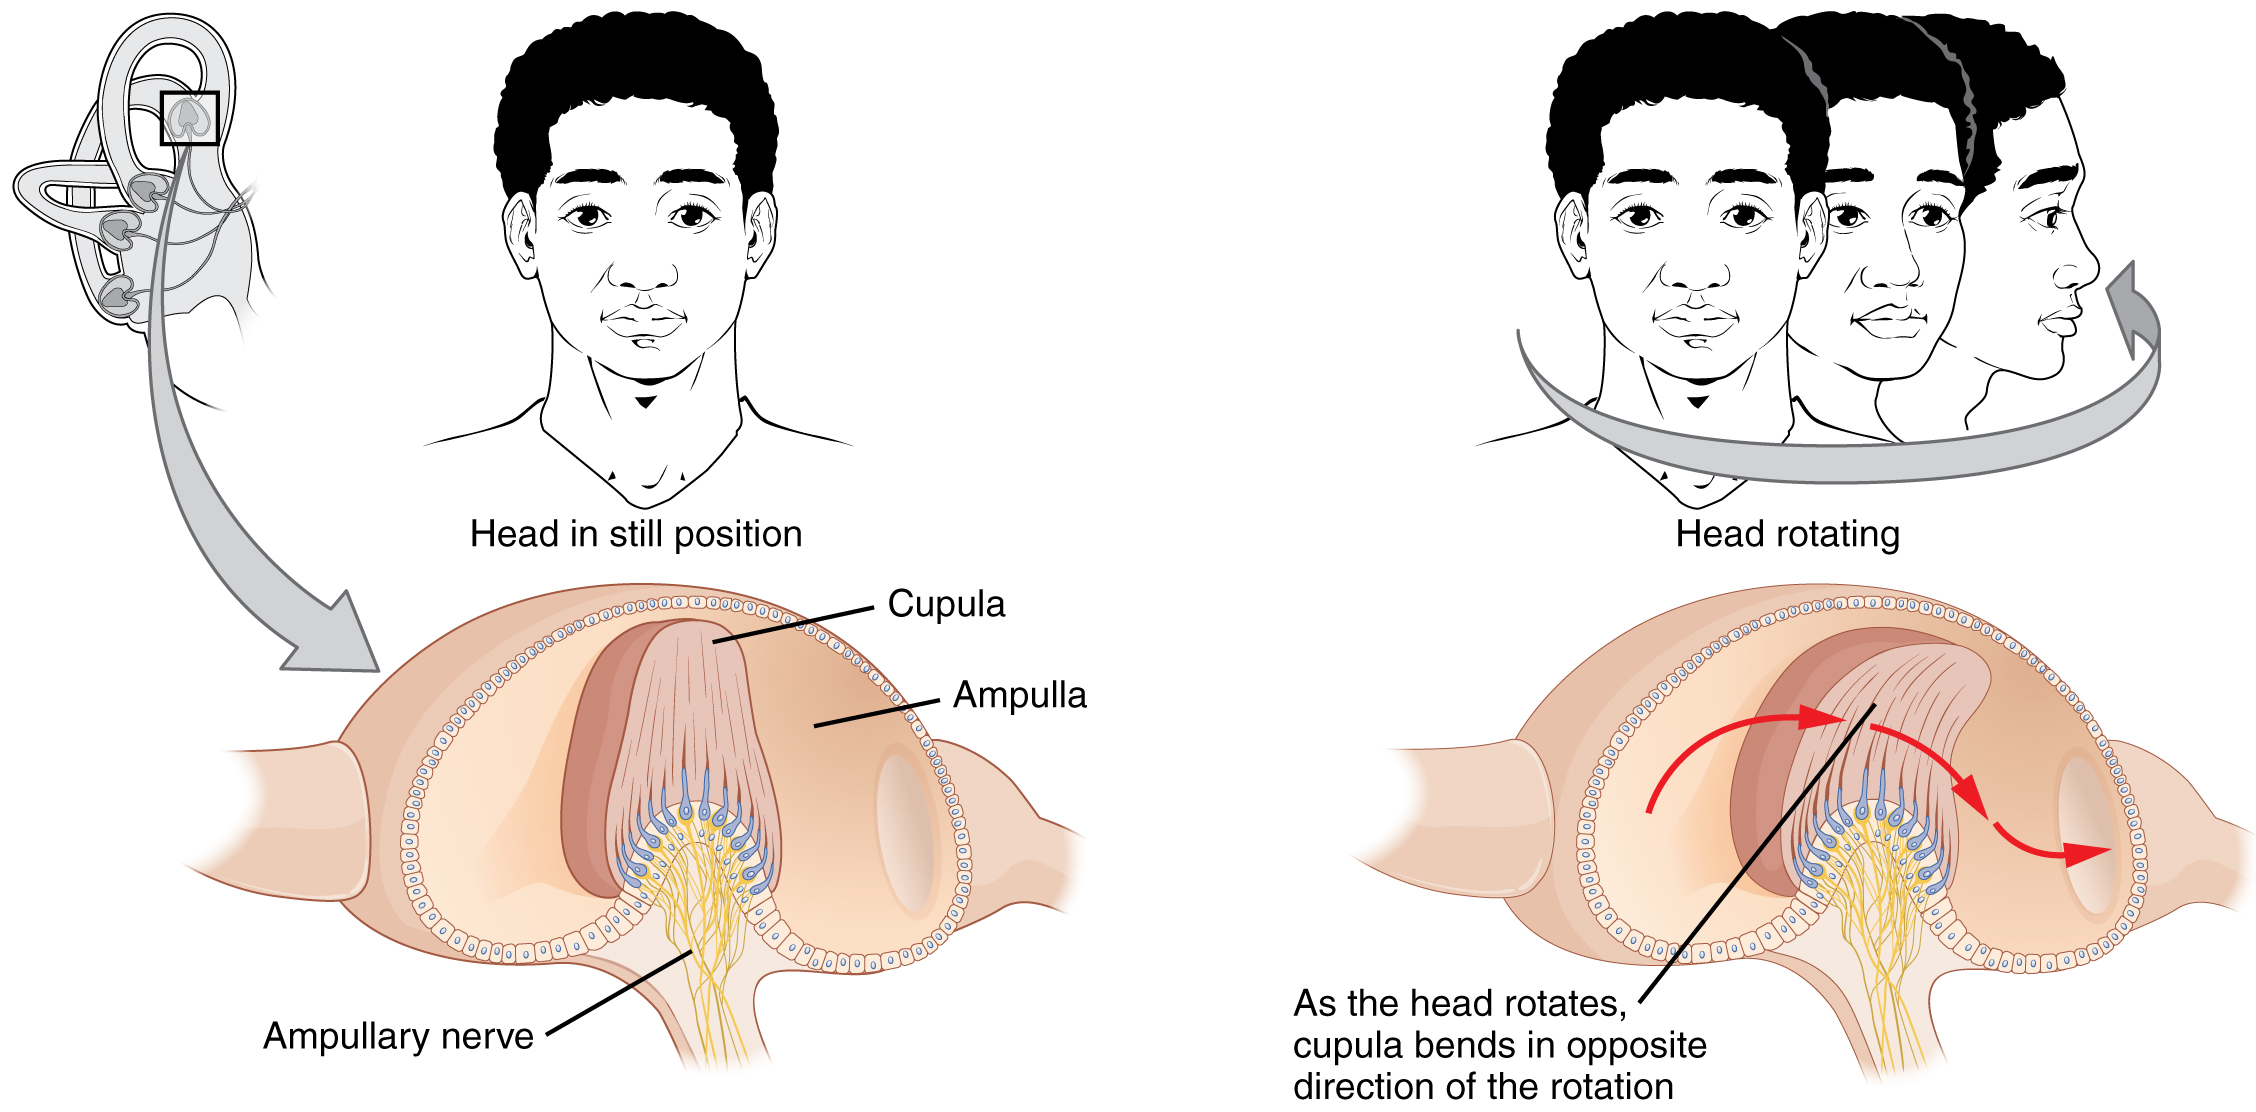 The left panel of this image shows a person’s head in a still position. Underneath this, the ampullary nerve is shown. The right panel shows a person rotating his head, and the below that, the direction of movement of the cupula is shown.